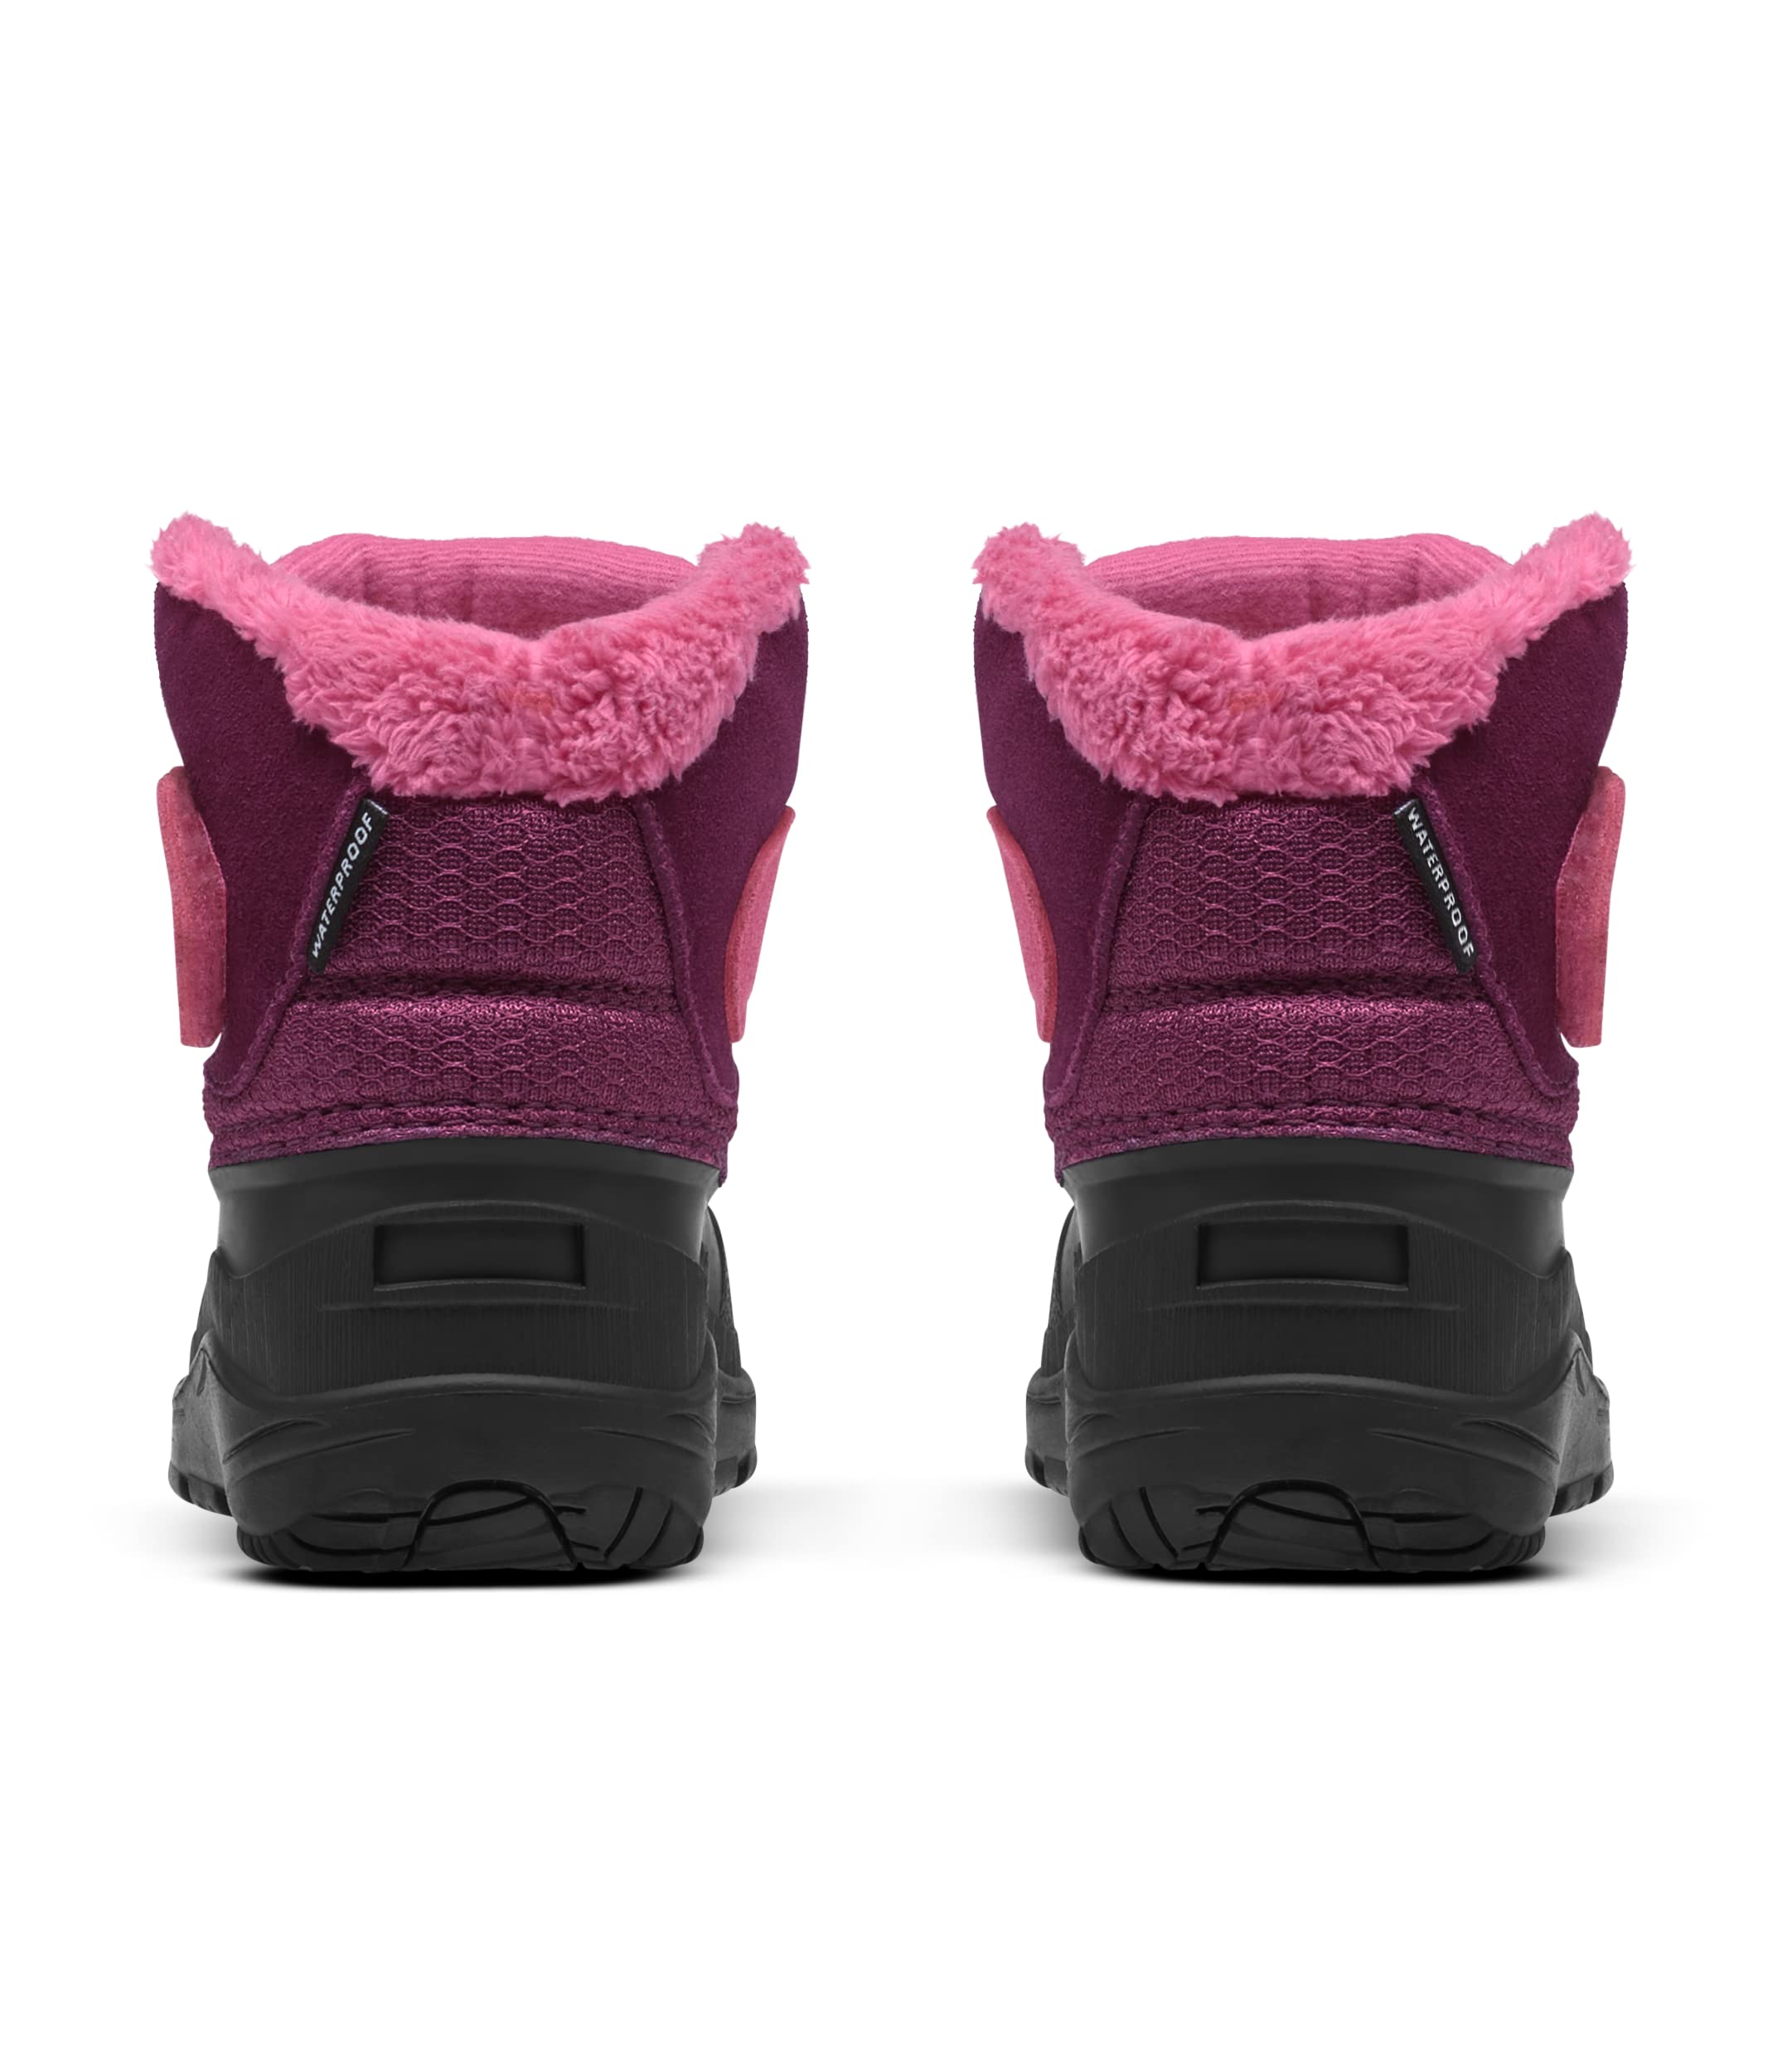 THE NORTH FACE Kids' Alpenglow II Insulated Snow Boot